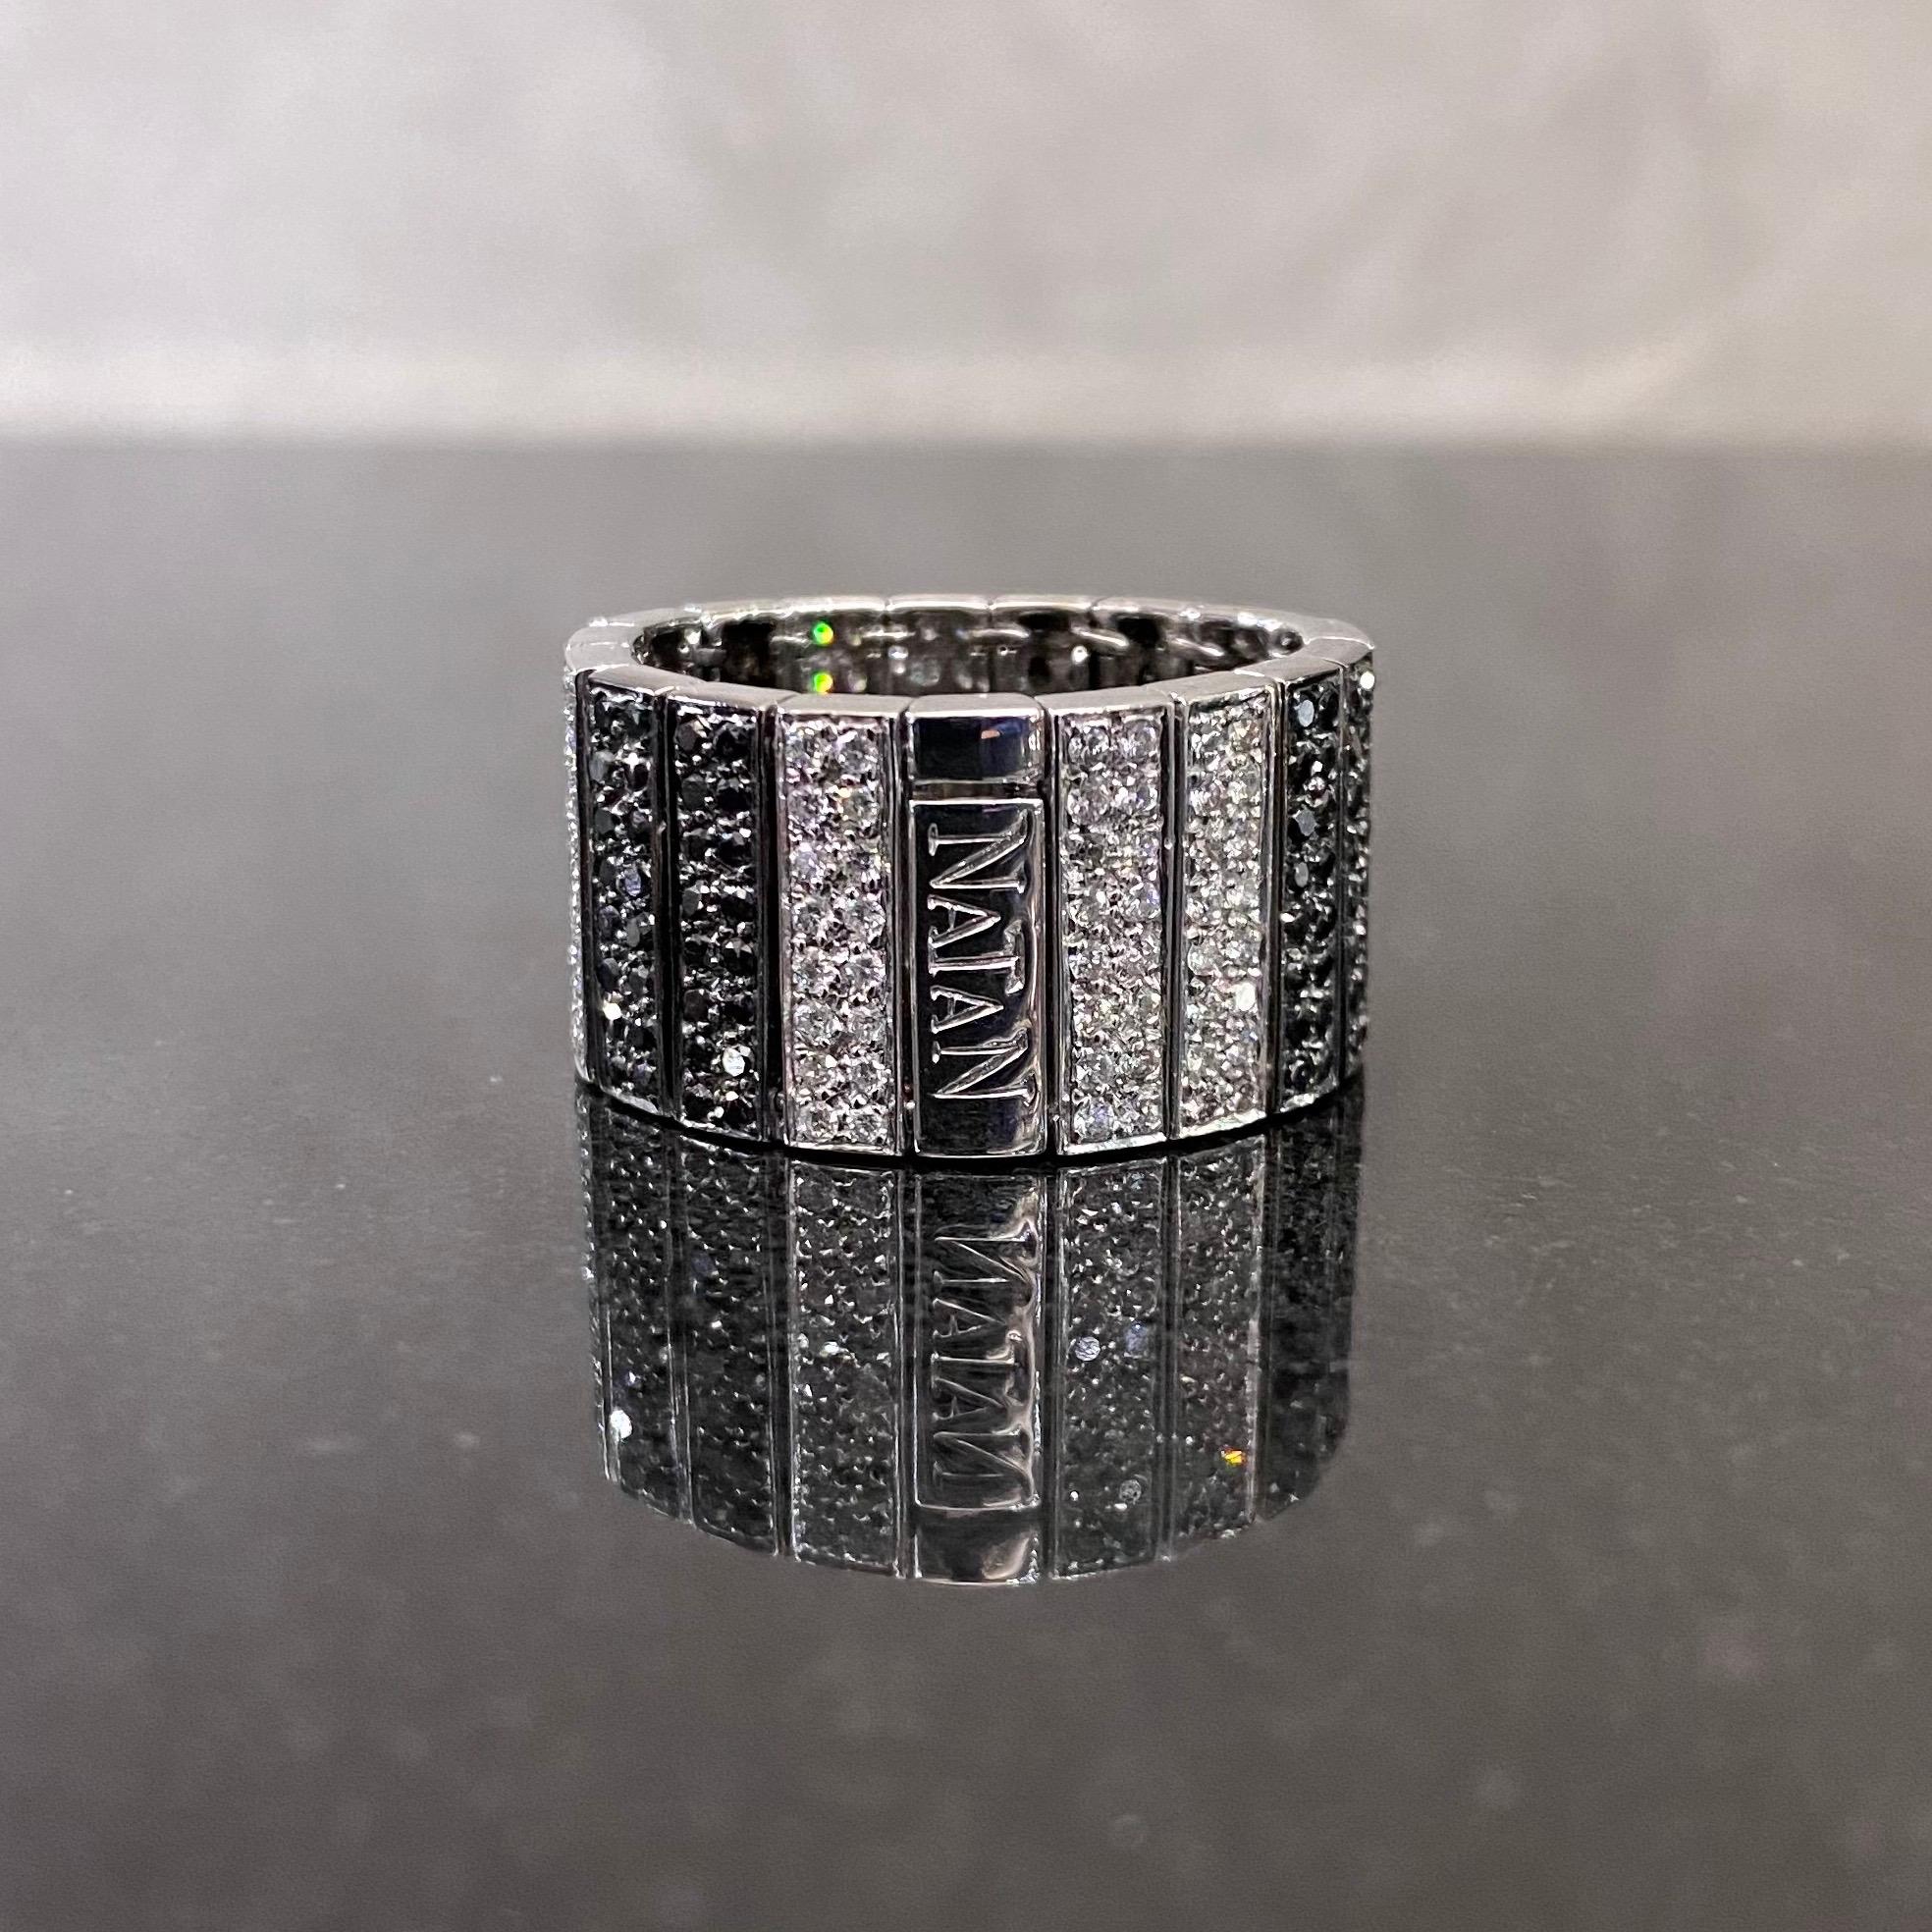 Natan colorless diamond and fancy black diamond geometric articulated band ring in 18 karat white and blackened gold, 2000s. This ring is designed as a sequence of 18 rectangular sections seamlessly articulated, one in polished white gold signed